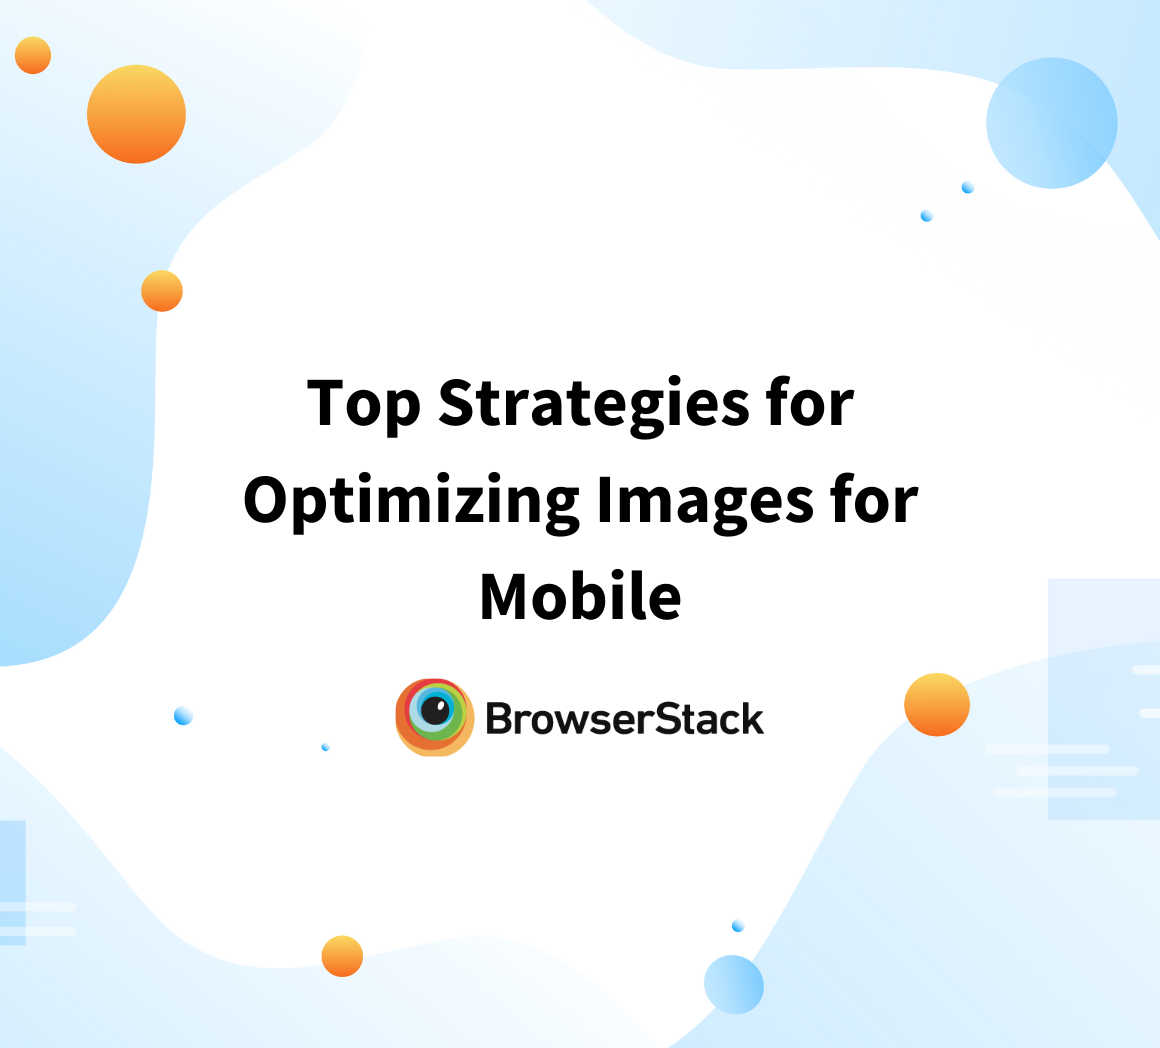 Top Strategies for Optimizing Images for Mobile